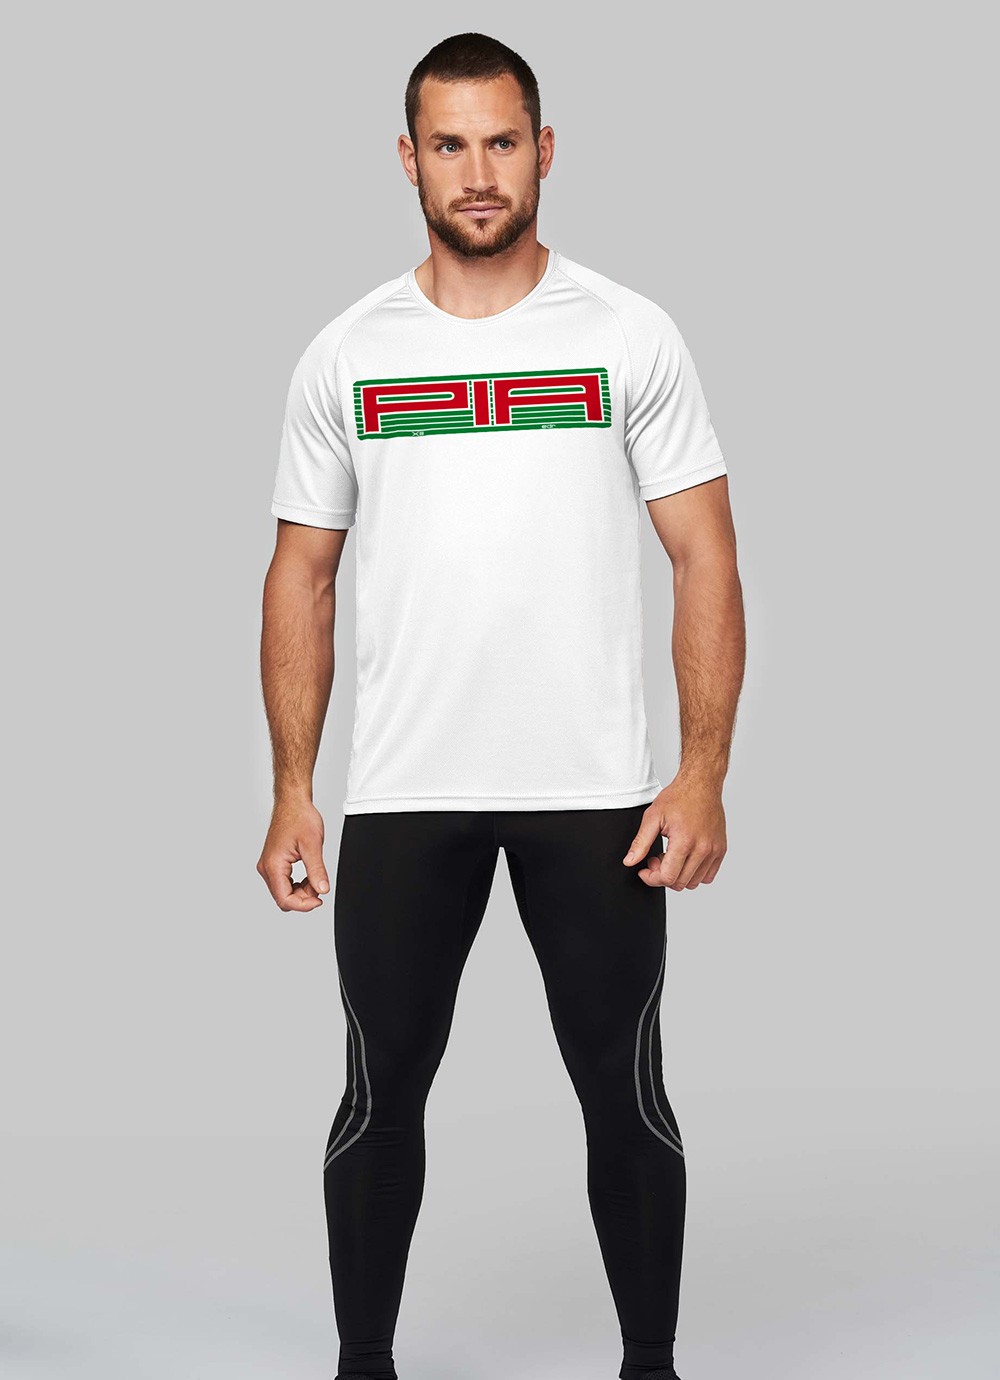 T-shirt sport homme Pia XIII EDR - Pia Line